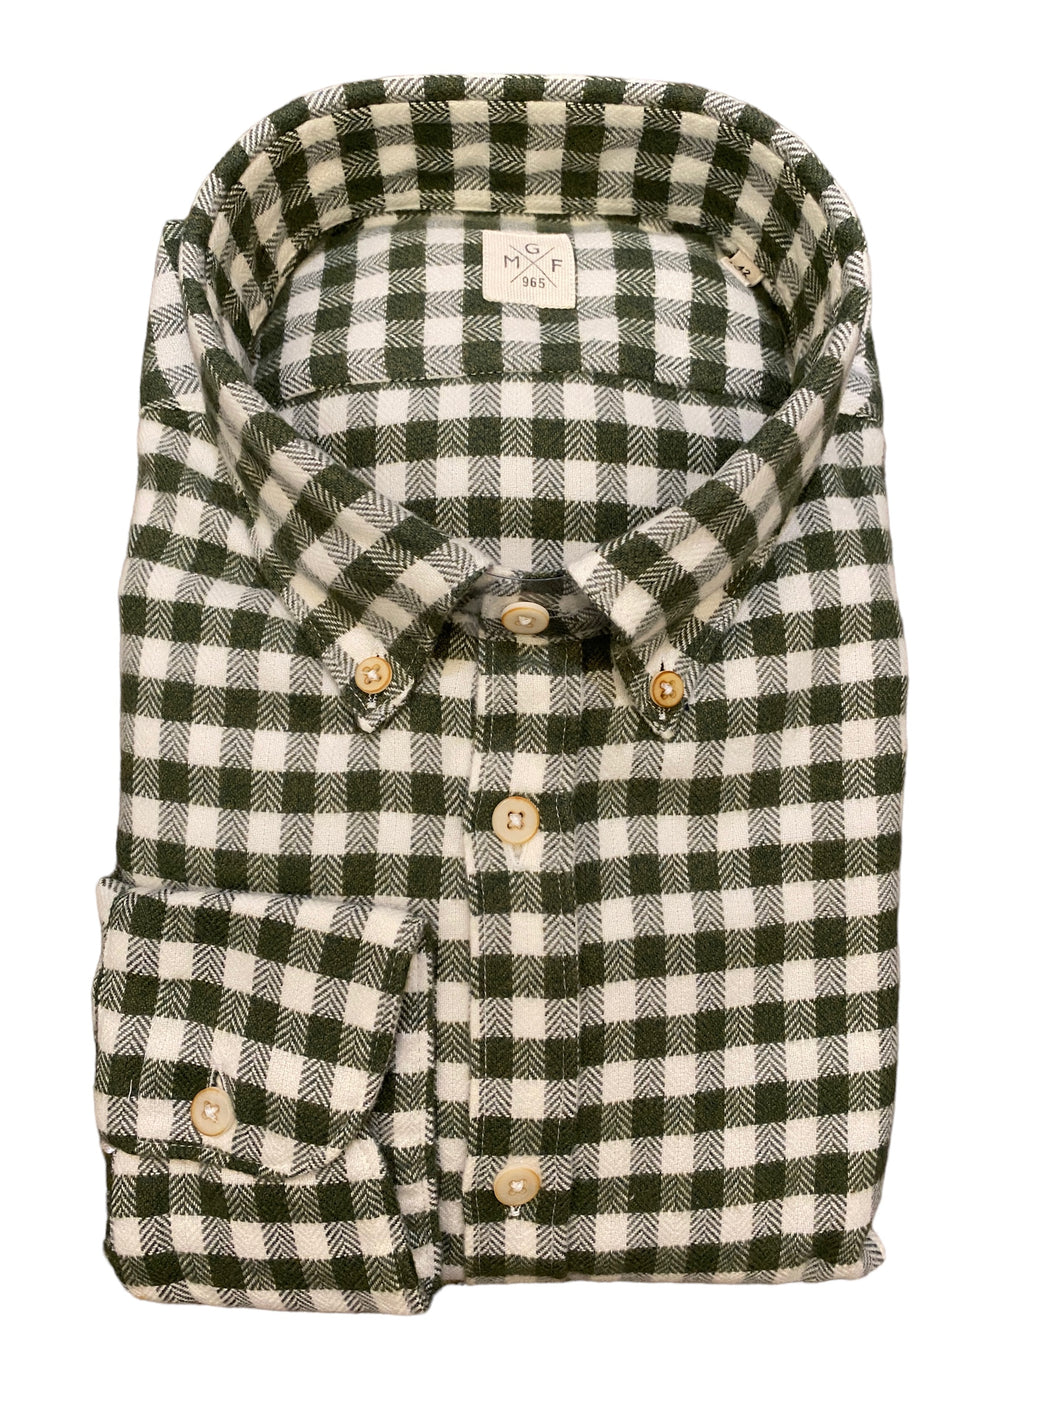 GMF 965 Flannel Gingham Shirt Green/Ivory